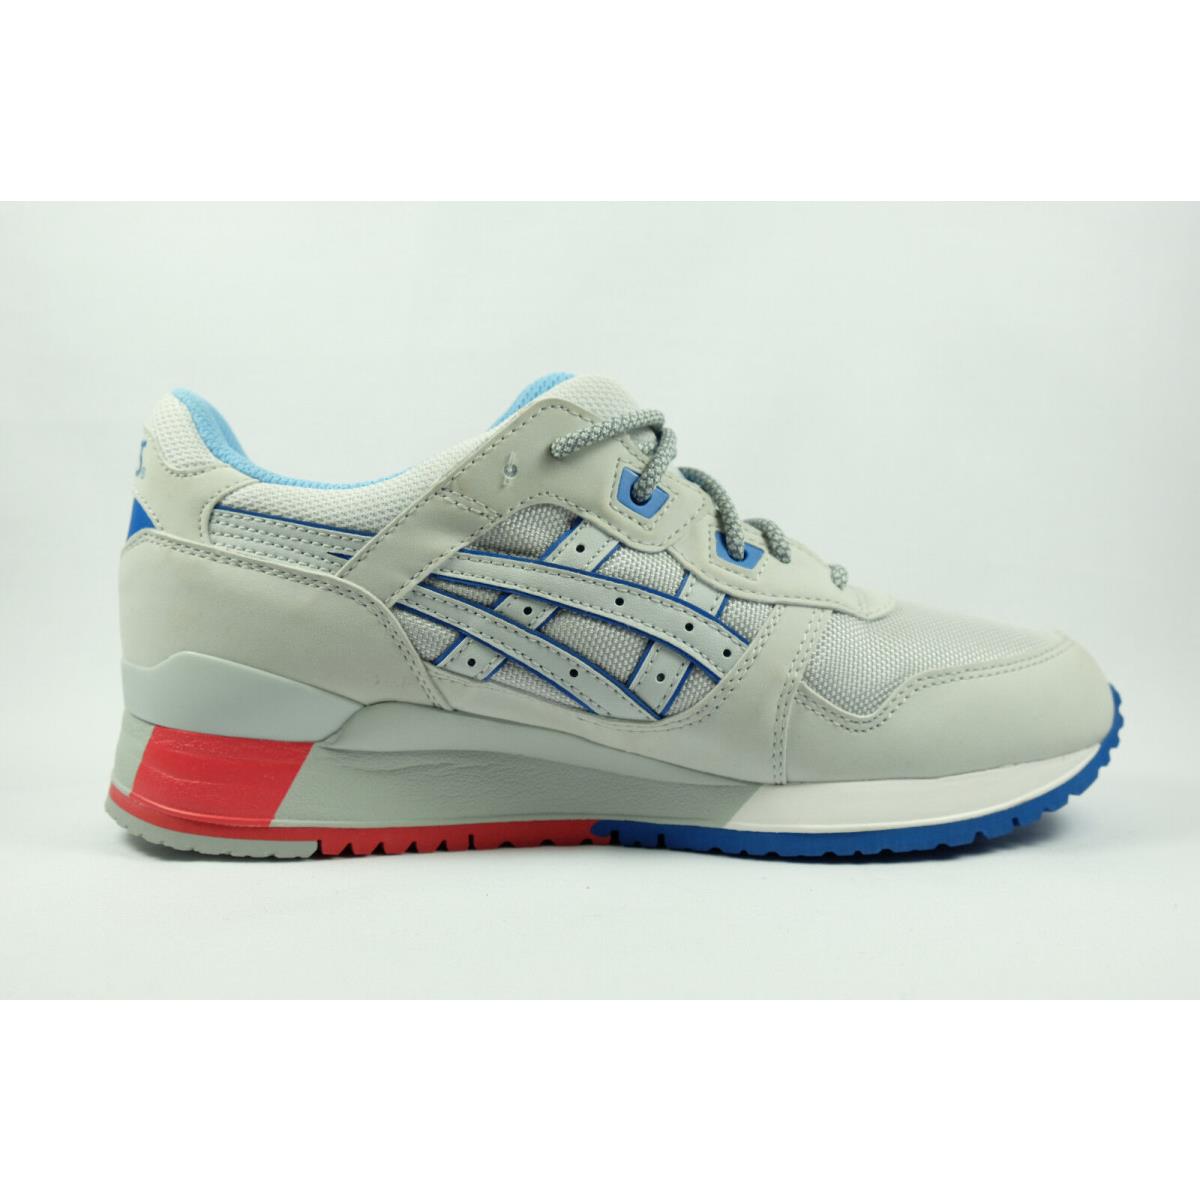 ASICS shoes III - Soft Grey / Blue / Red 2